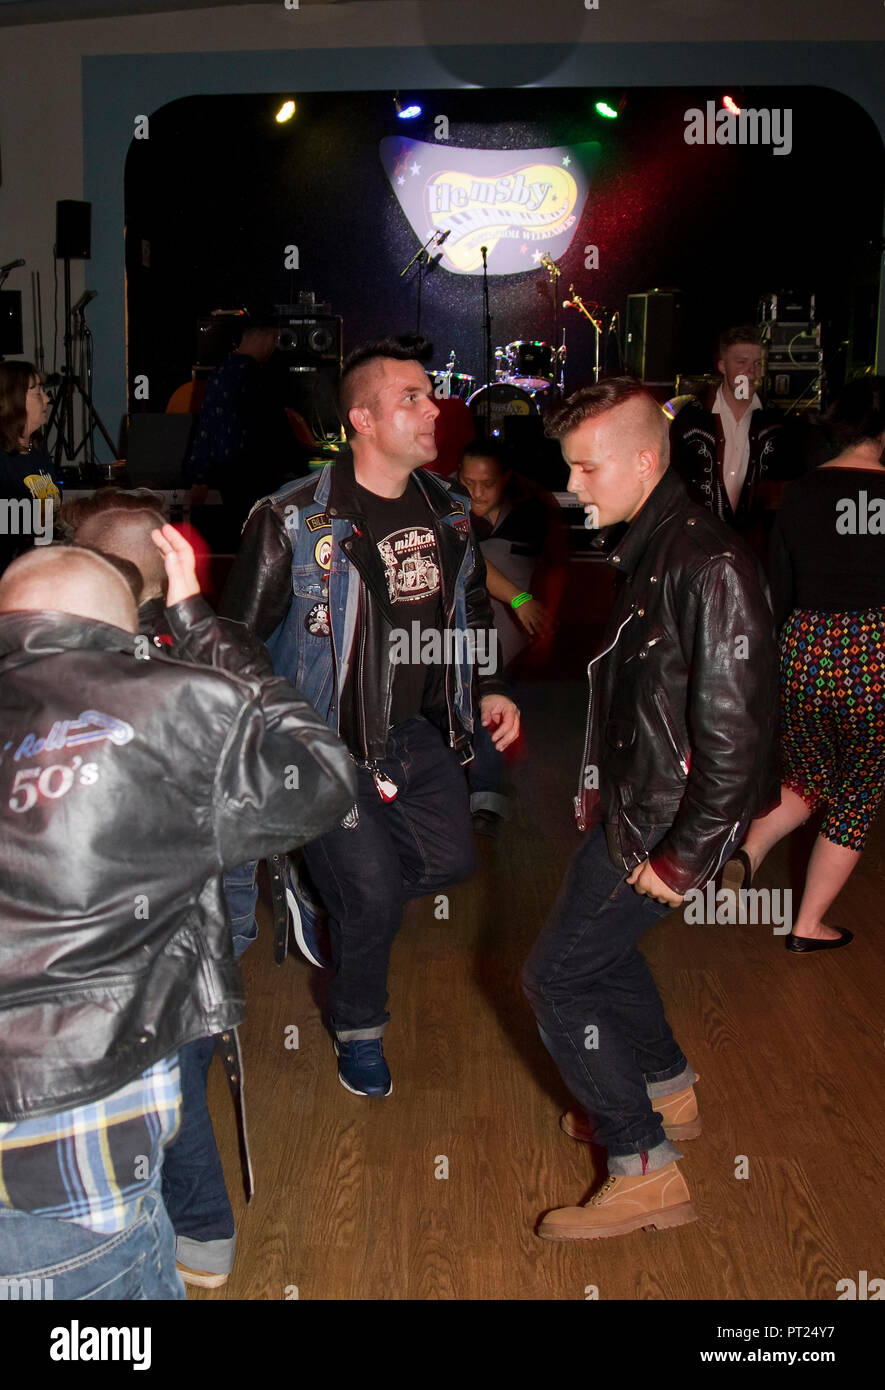 Norfolk, UK. 5 October 2018.  A music phenomena that attracts all ages.  Rockabilly David Monger bopping with his sons, regular visitors to the Hemsby Rock 'n' Roll Weekender.  Credit: Adrian Buck/Alamy Live News Stock Photo